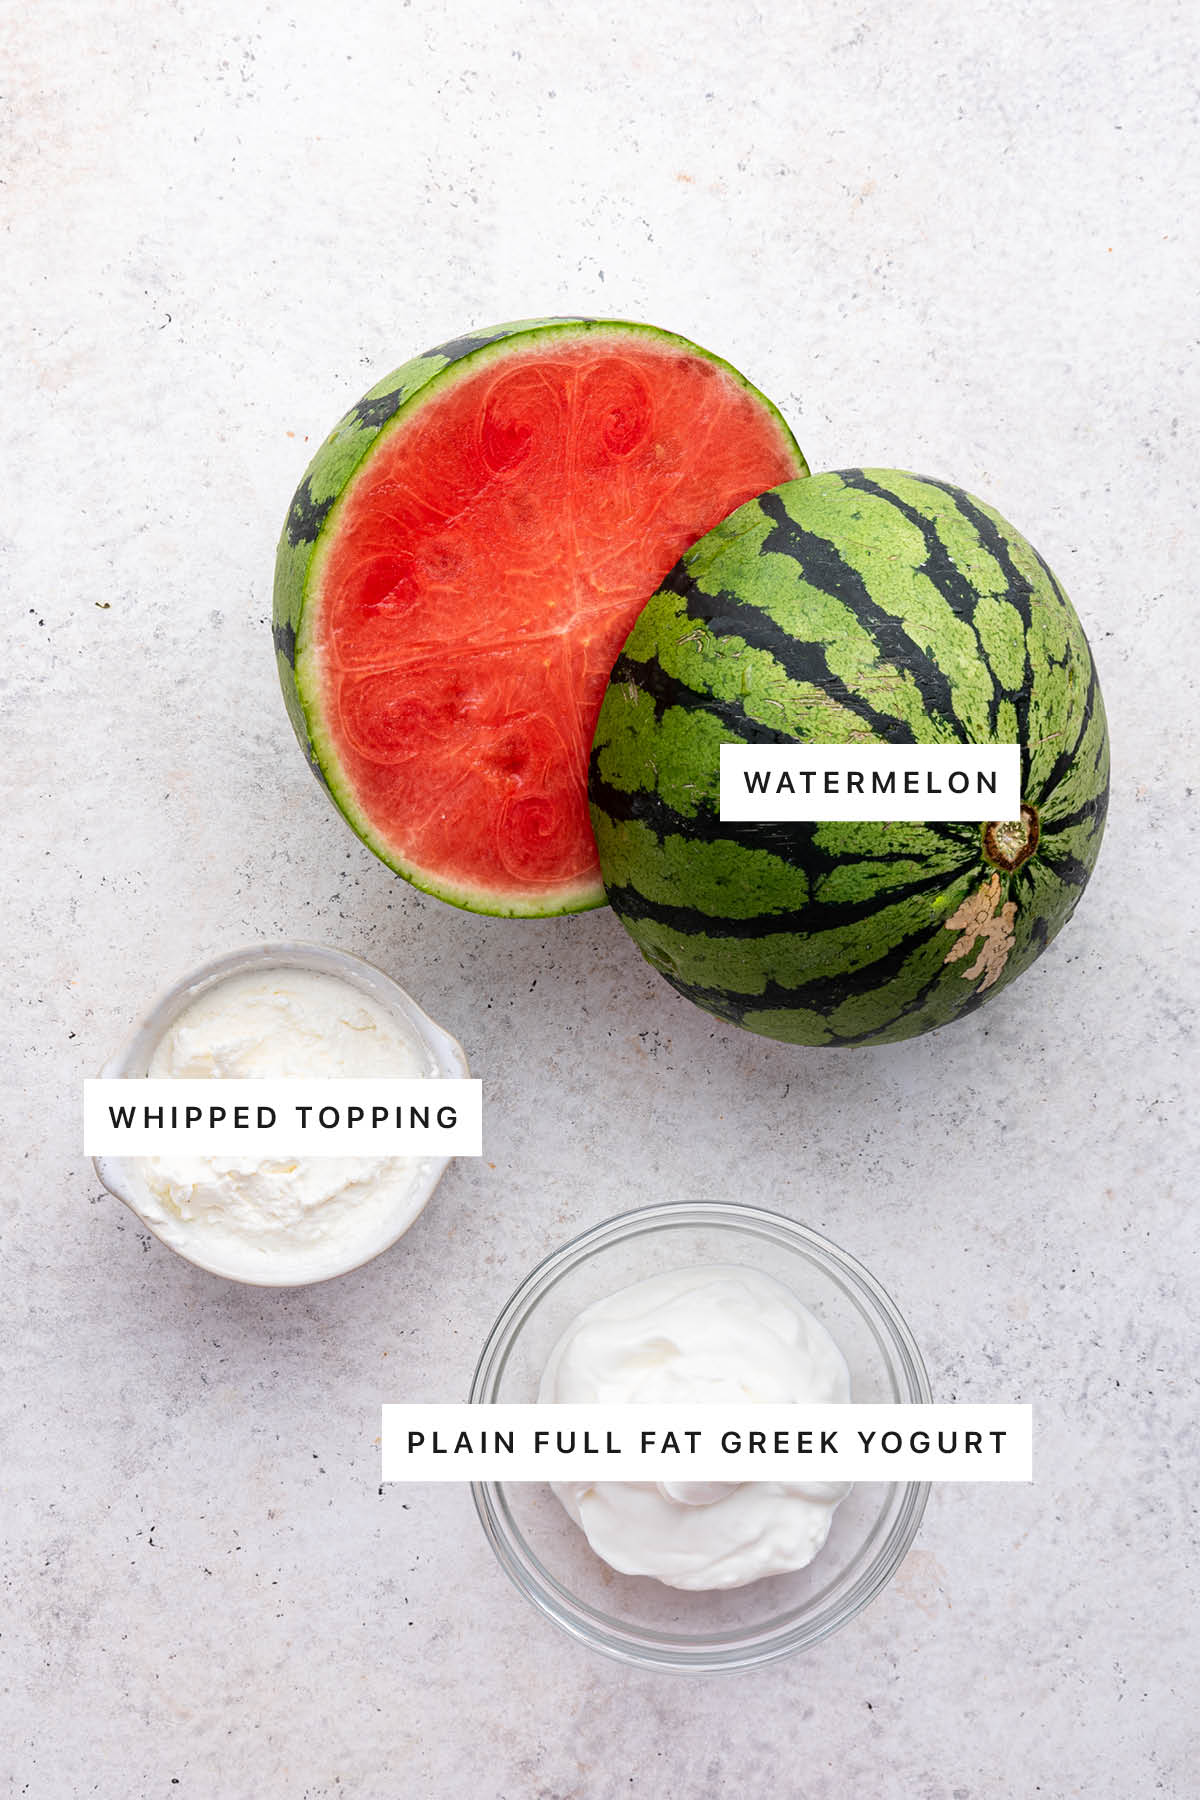 Ingredients measured out to make Watermelon Fries: watermelon, whipped topping and Greek yogurt.